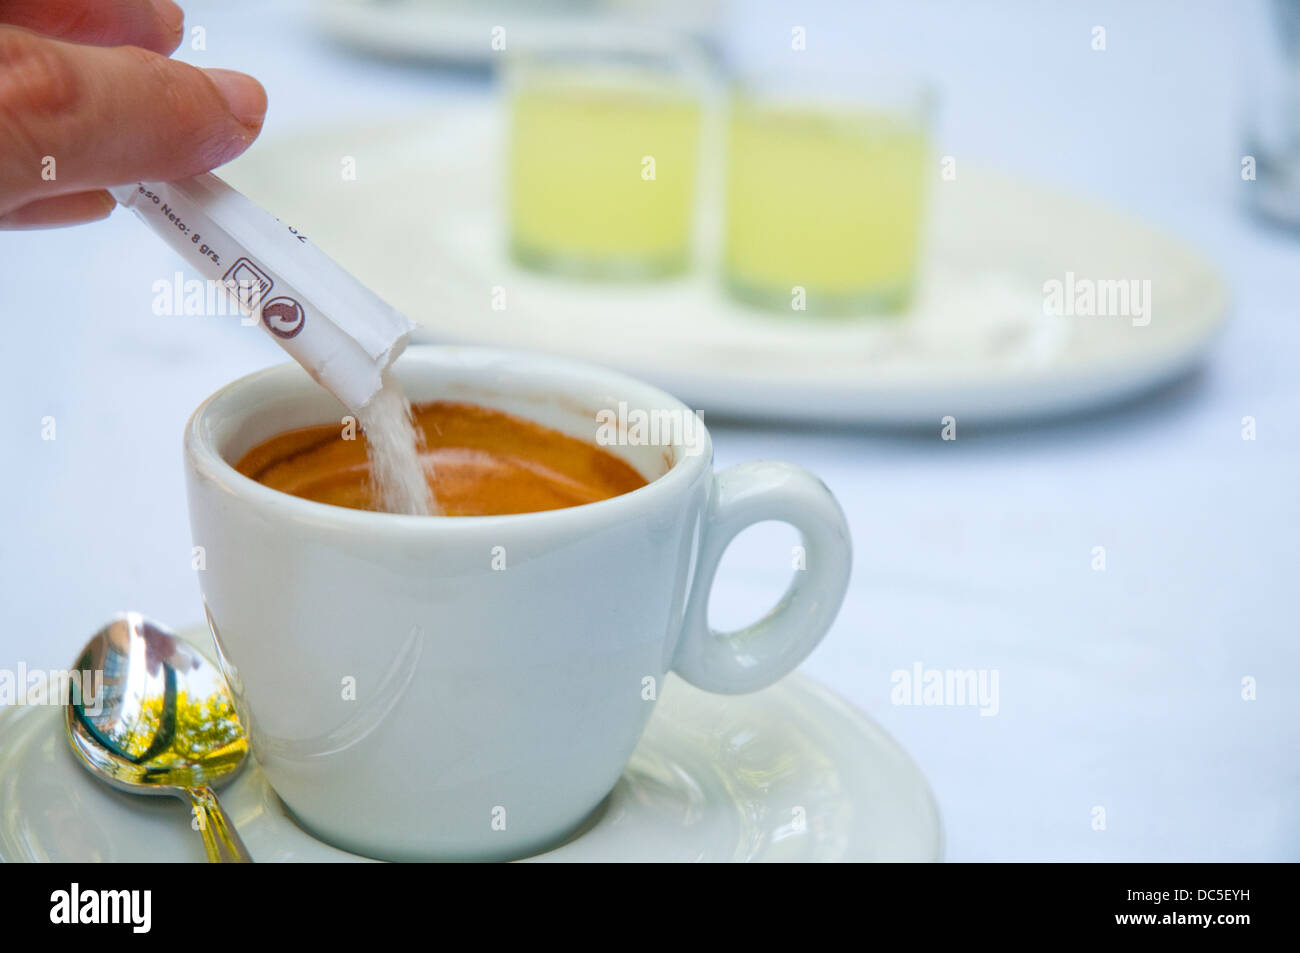 Hand pouring sugar in a cup of coffee. Close view. Stock Photo